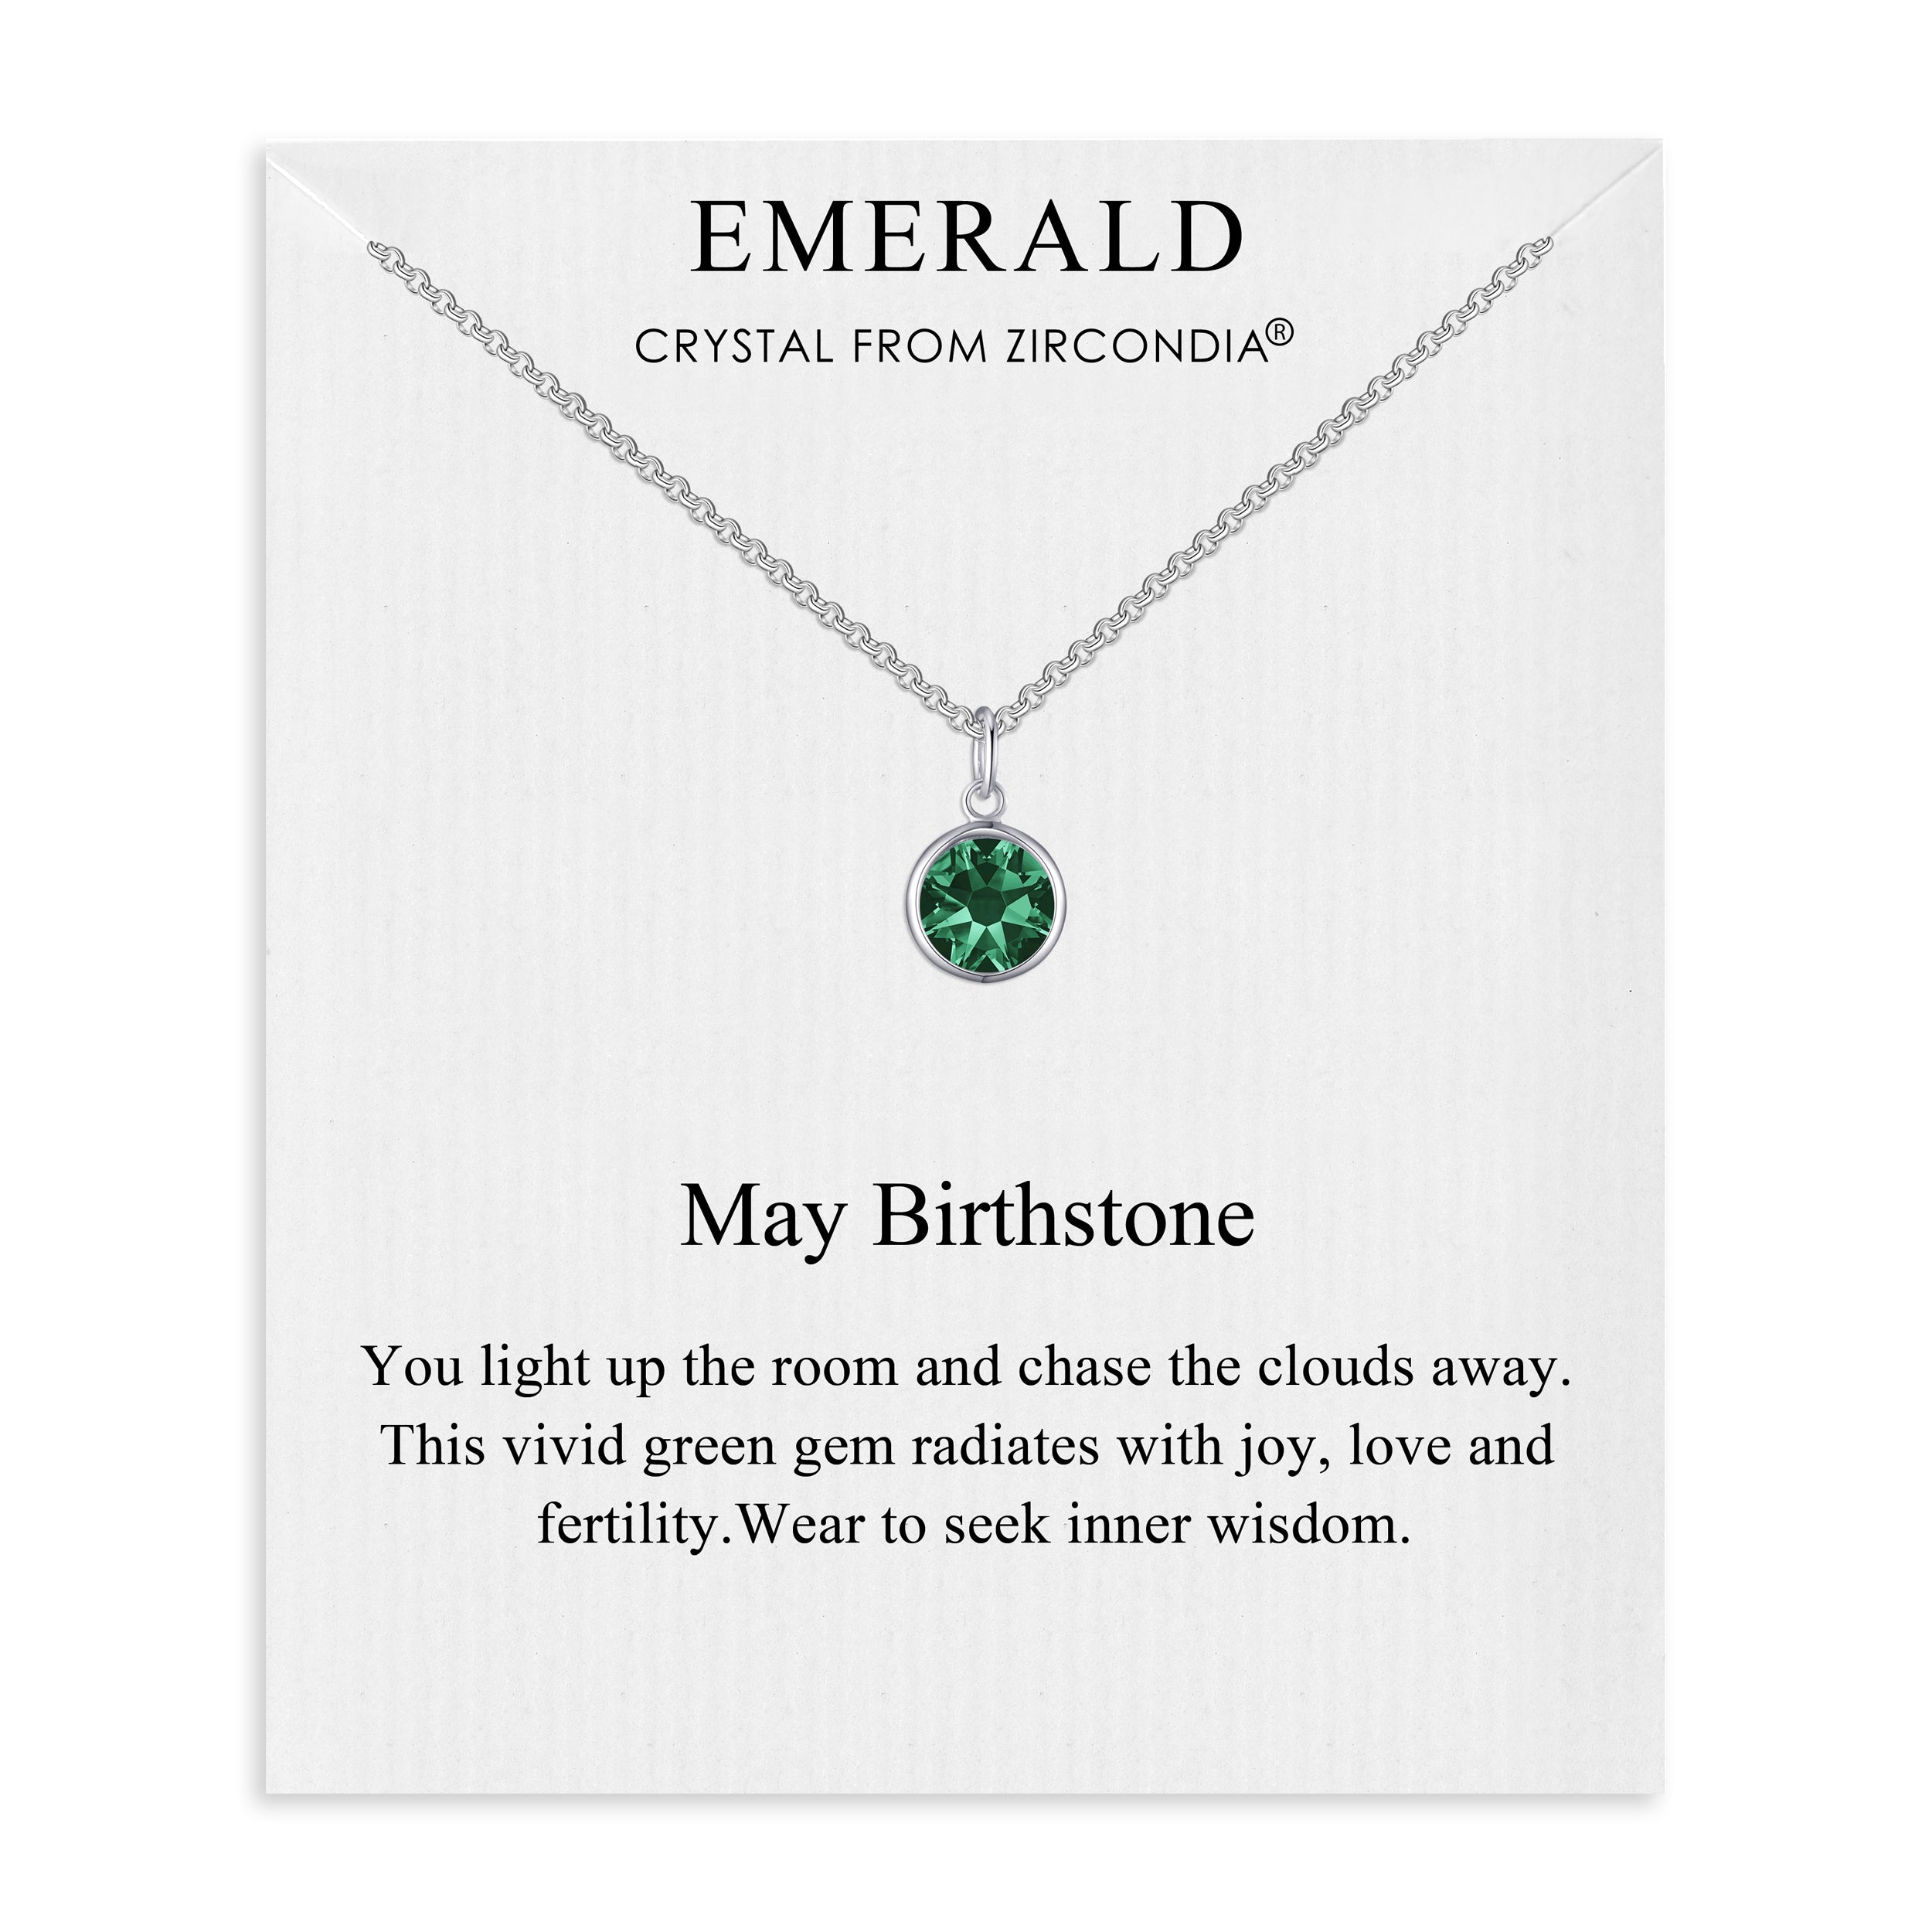 May (Emerald) Birthstone Necklace Created with Zircondia® Crystals